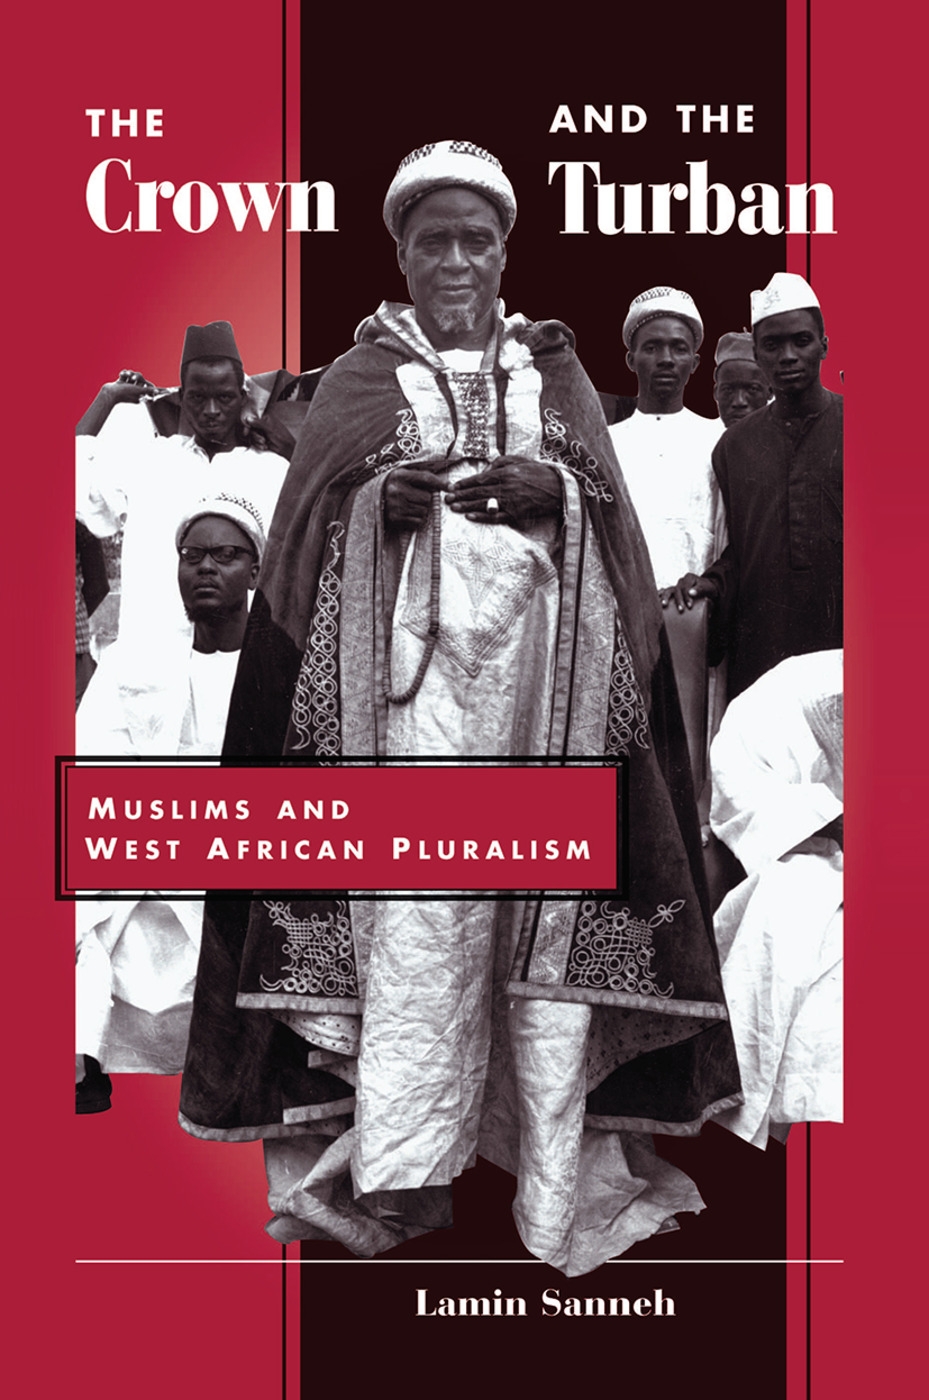 The Crown and the Turban: Muslims and West African Pluralism